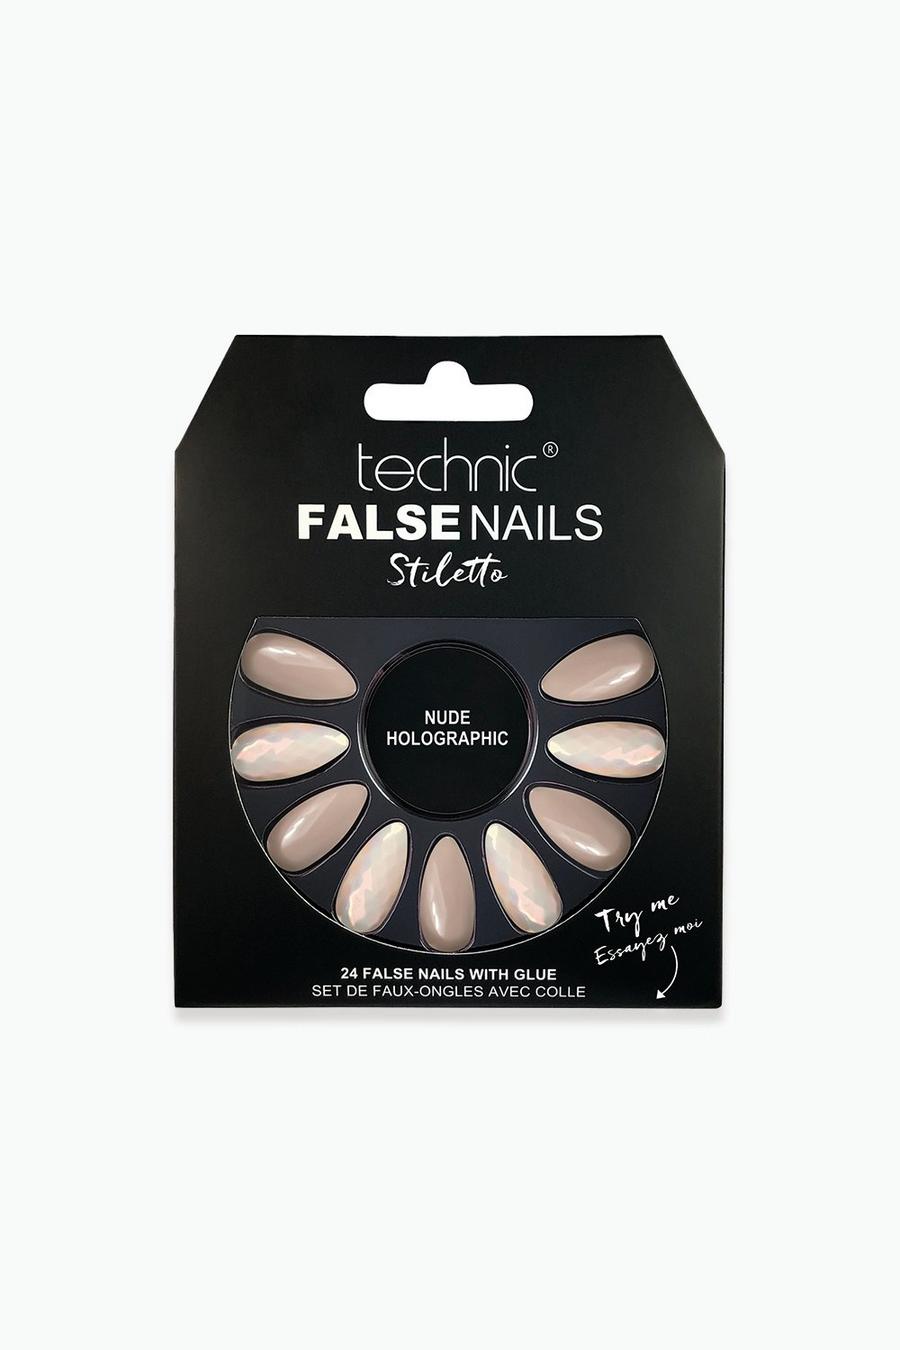 Technic - Faux ongles Stiletto - Nude Holographic, 02 nude